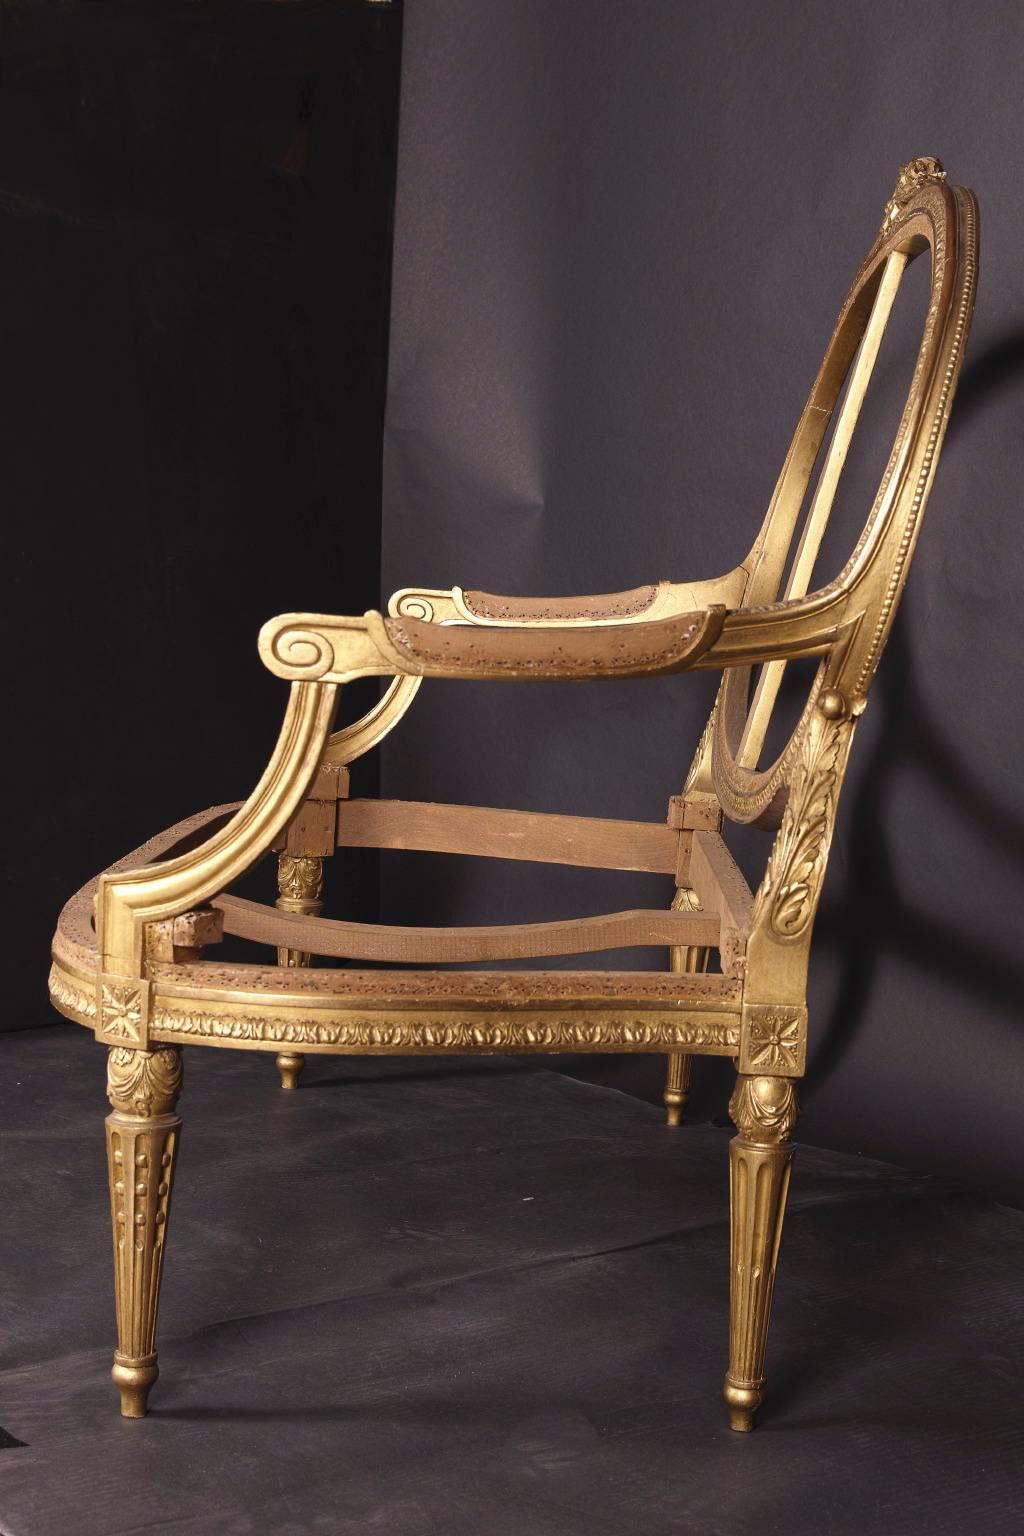 From the 19th century, this sofa frame was hand-carved and then painted with gold leaf by hand. The frames are ready to be upholstered by the purchaser, an excellent opportunity to match the upholstery of other furniture, or the color scheme of a